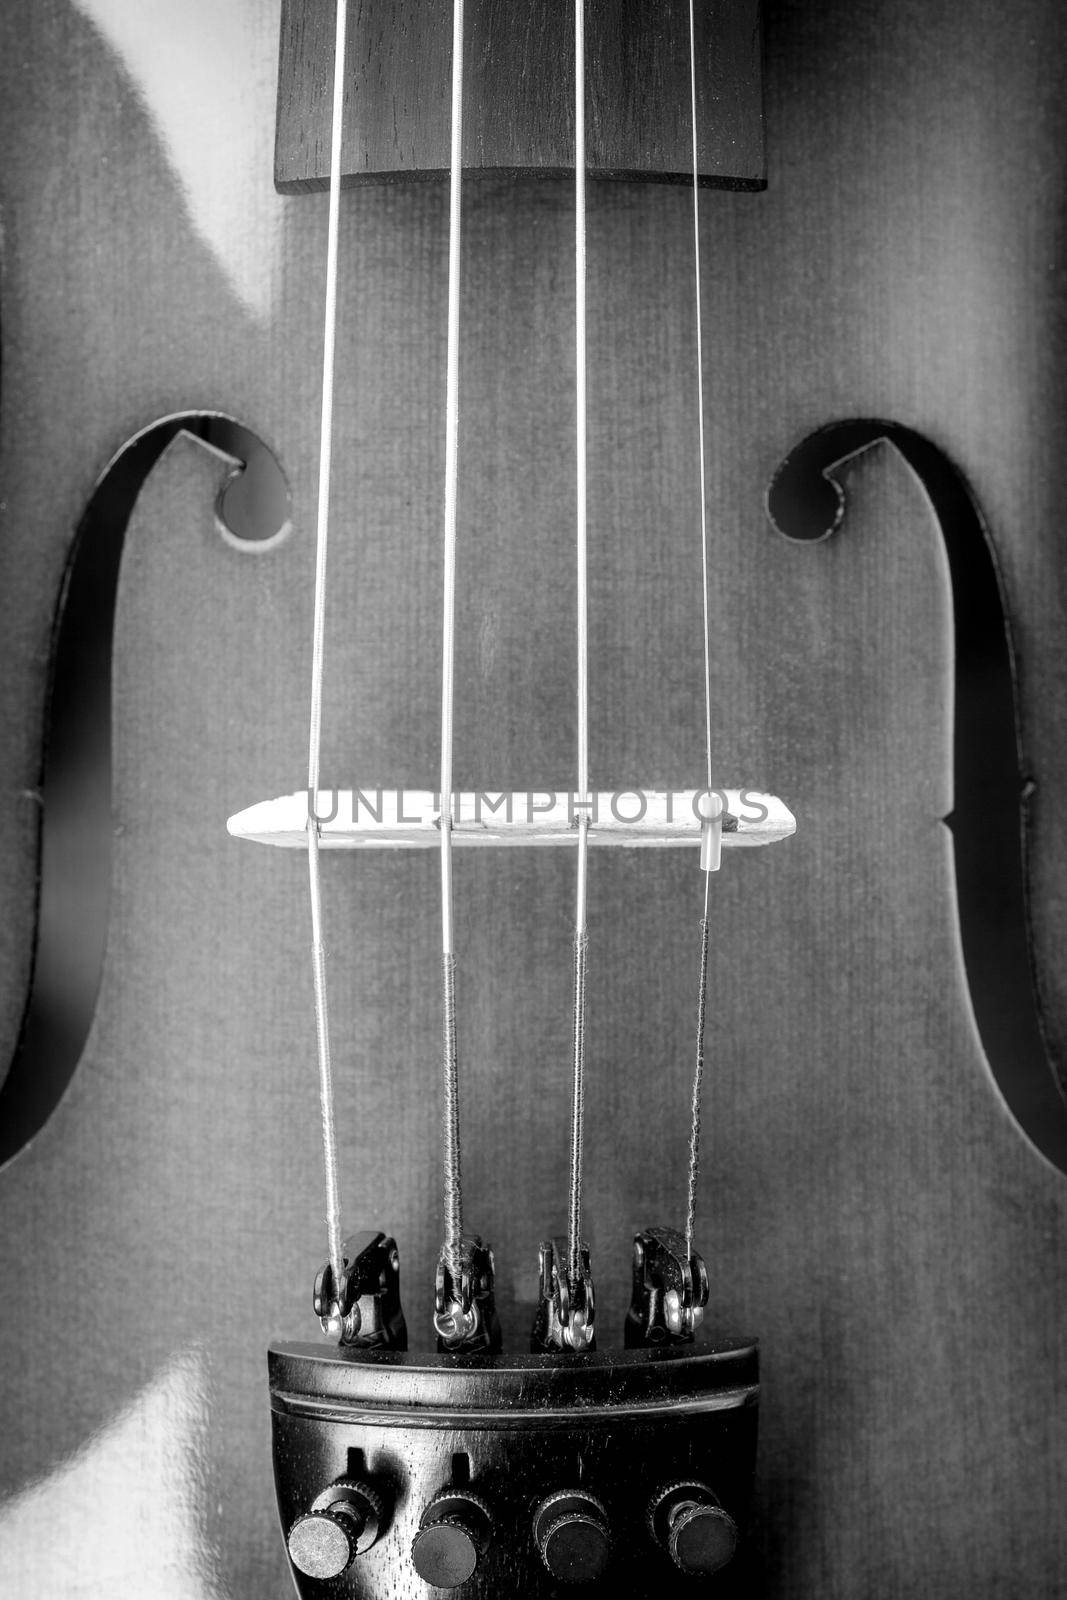 details of classic violin by norgal